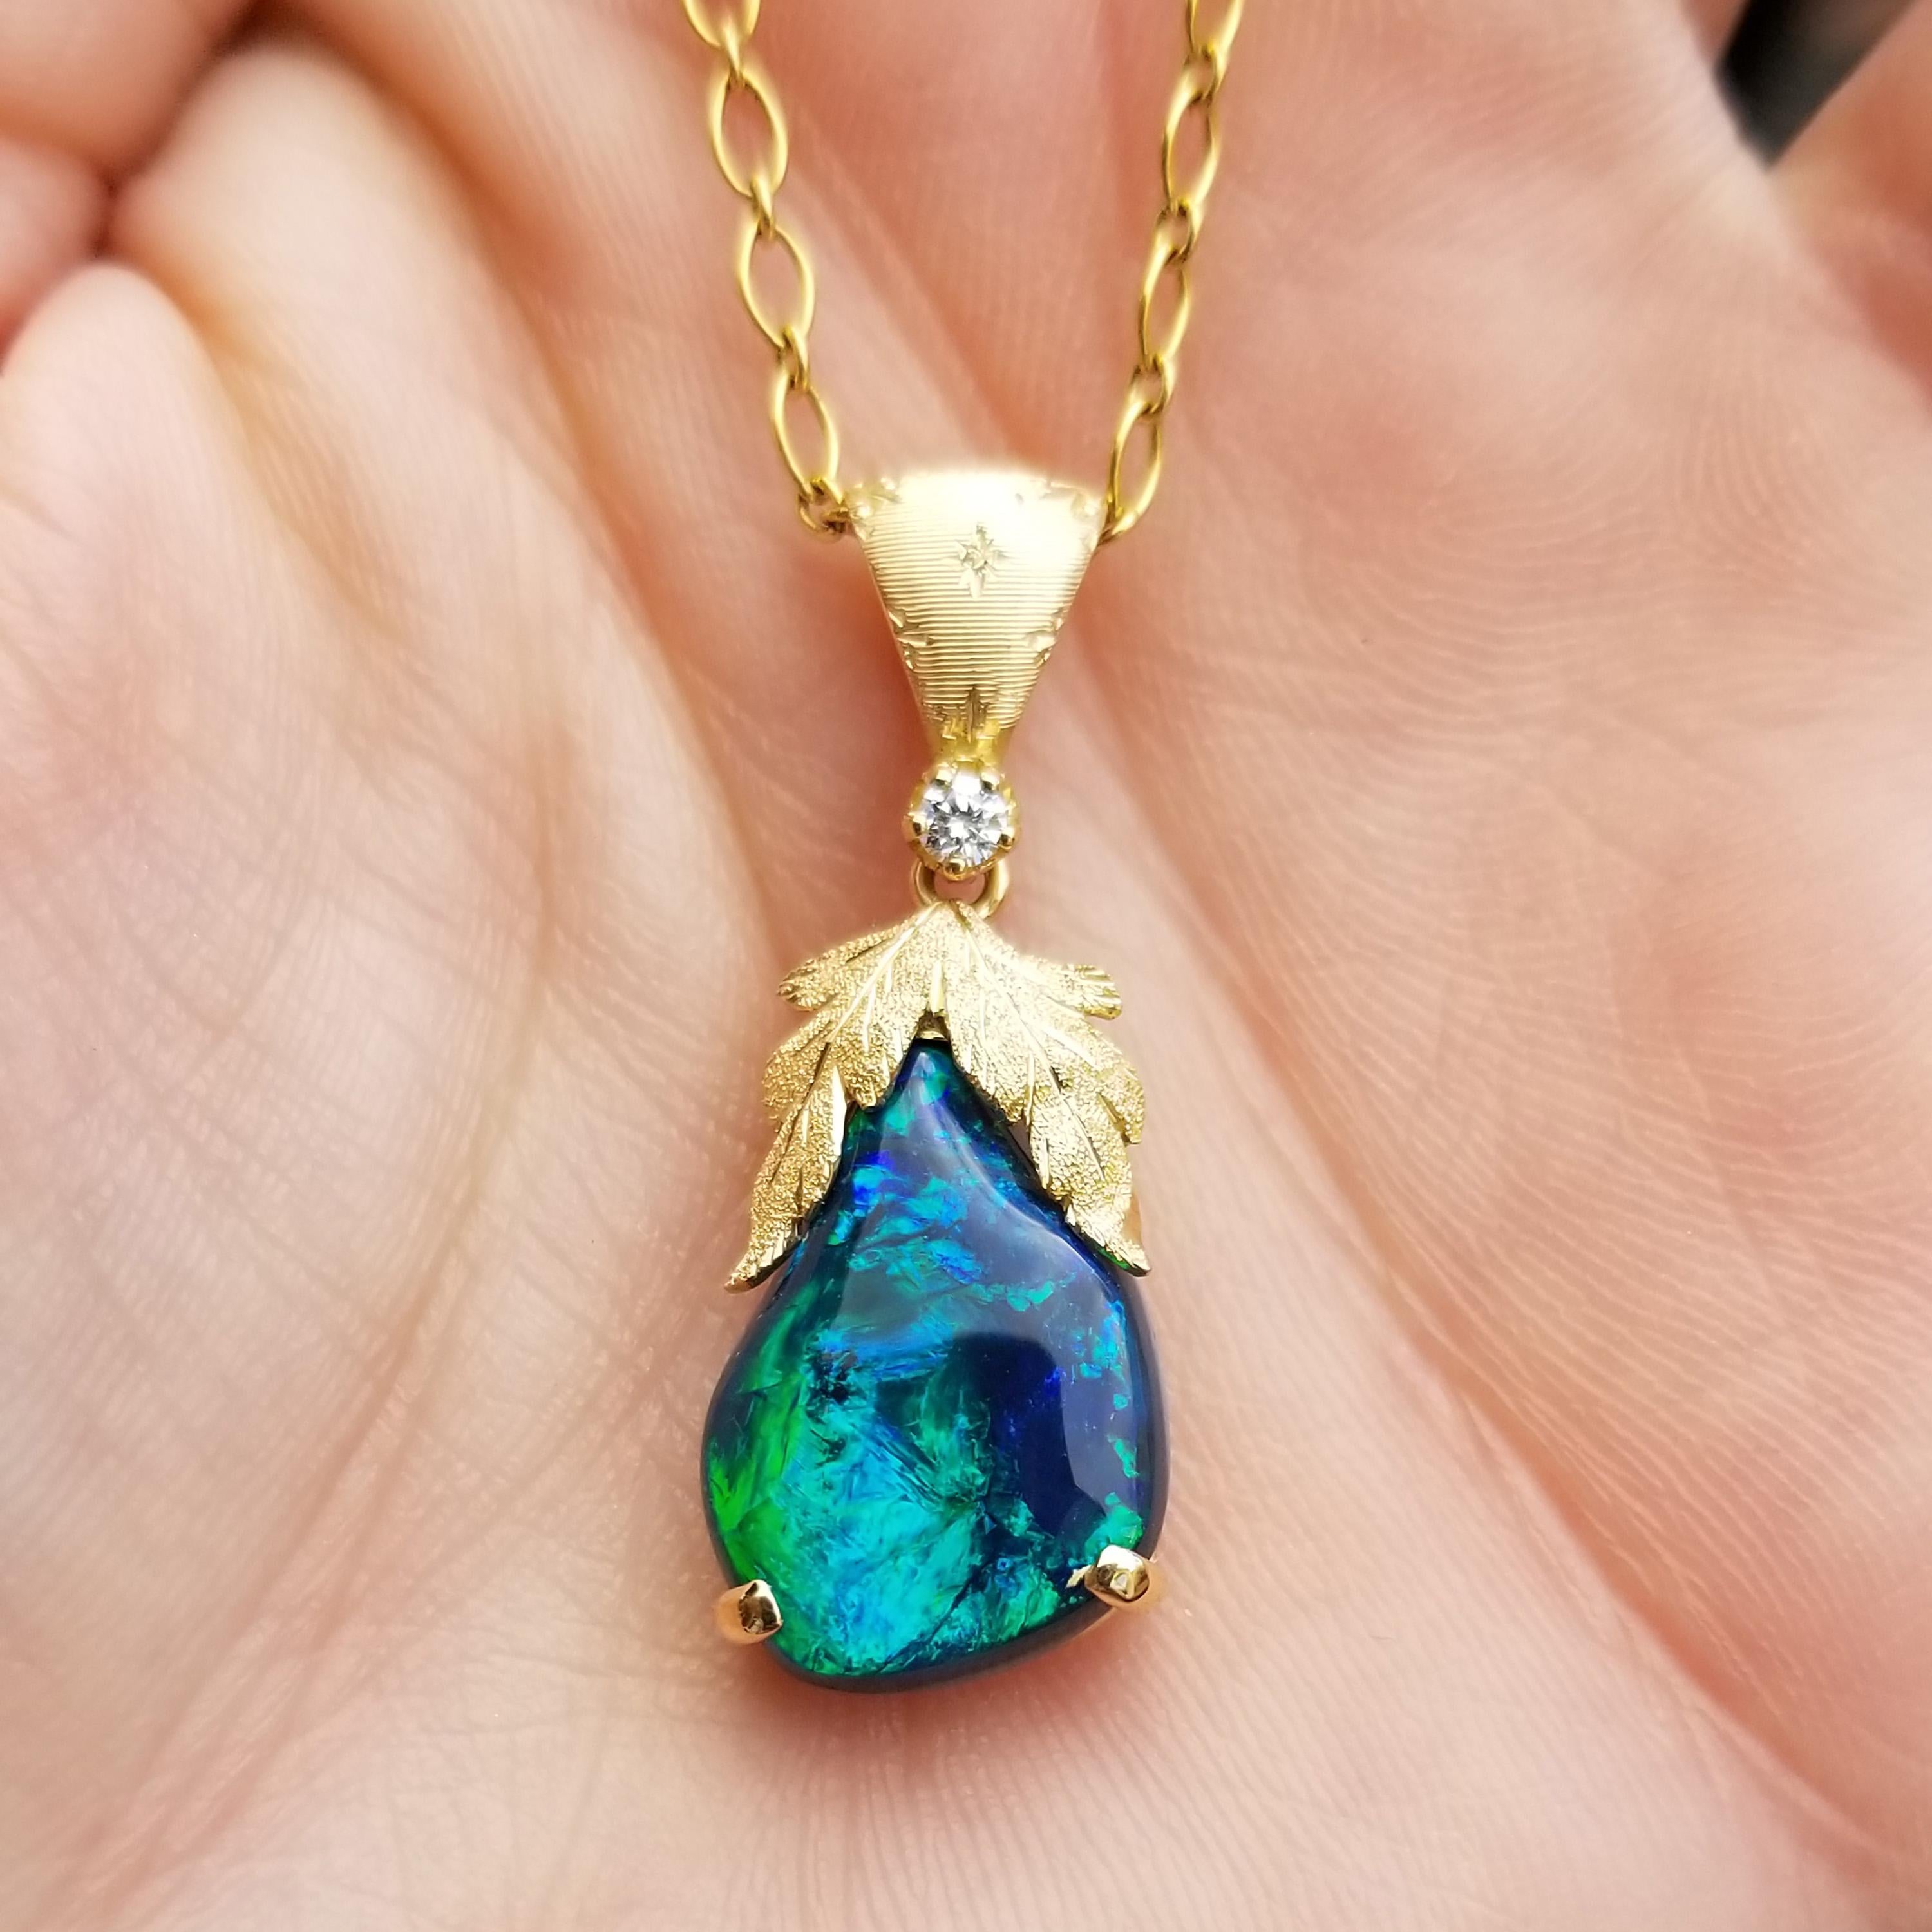 Pear Cut 5.98 Carat Black Opal and 18 Karat Gold Hand-Engraved Necklace Handmade in Italy